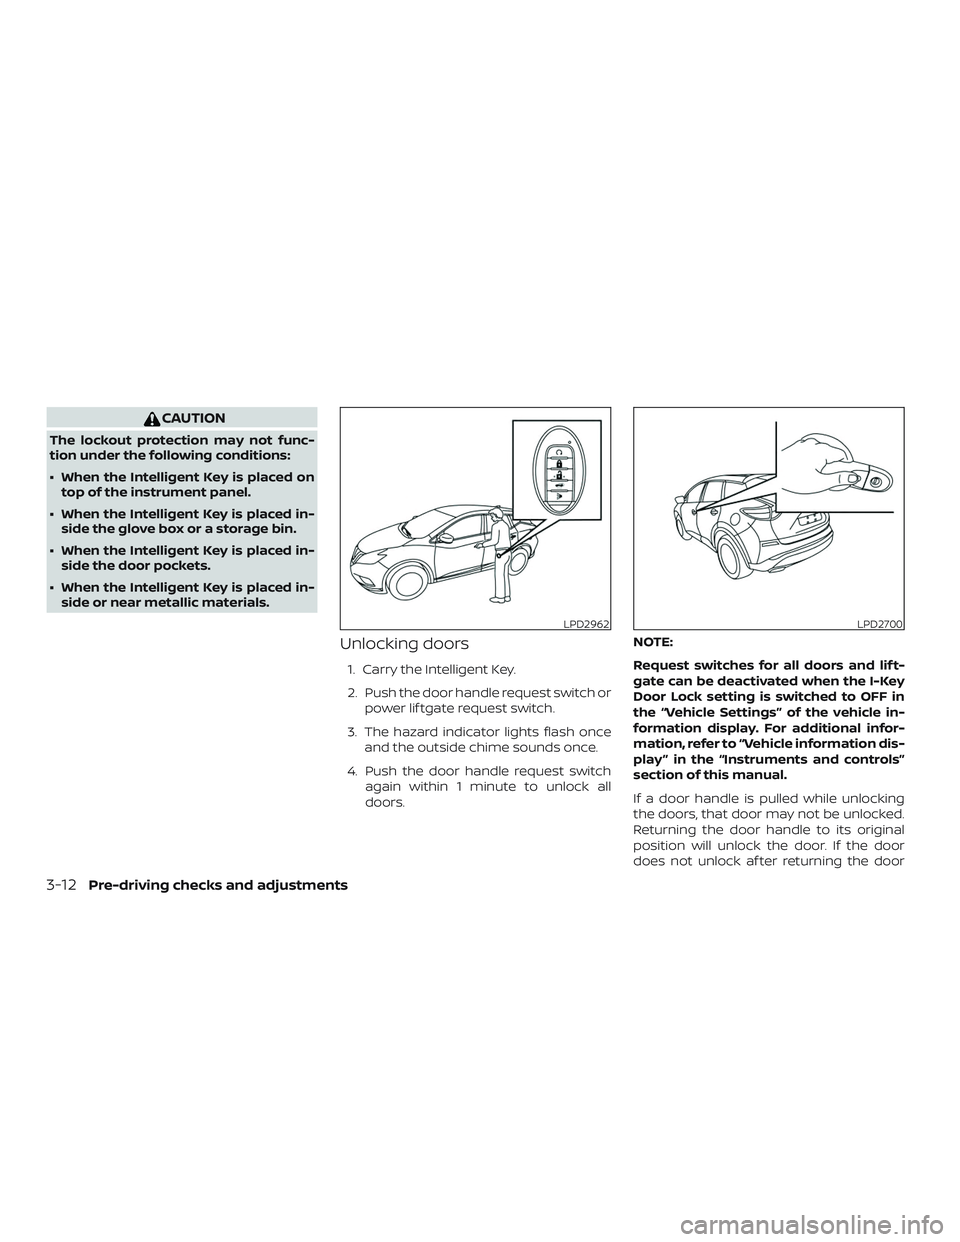 NISSAN MURANO 2019  Owner´s Manual CAUTION
The lockout protection may not func-
tion under the following conditions:
∙ When the Intelligent Key is placed ontop of the instrument panel.
∙ When the Intelligent Key is placed in- side 